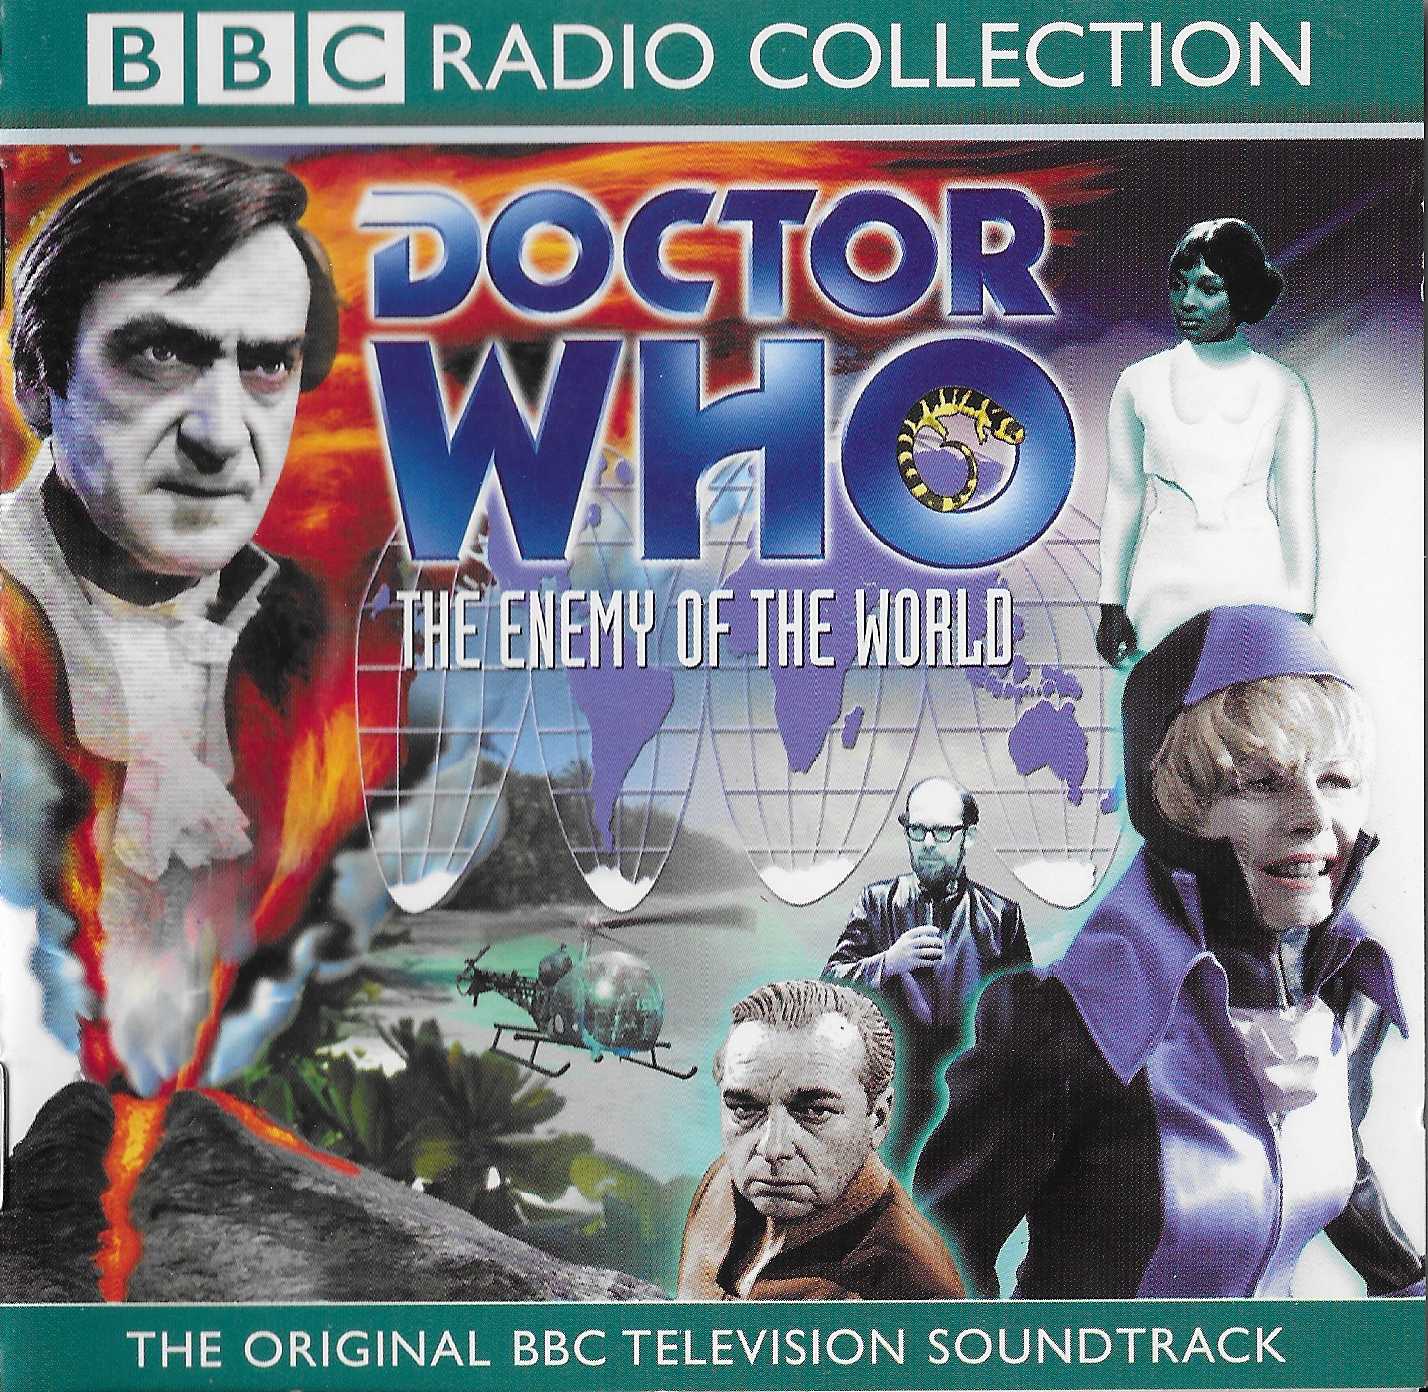 Picture of ISBN 0-563-53503-2 Doctor Who - The enemy of the world by artist David Whitaker from the BBC records and Tapes library